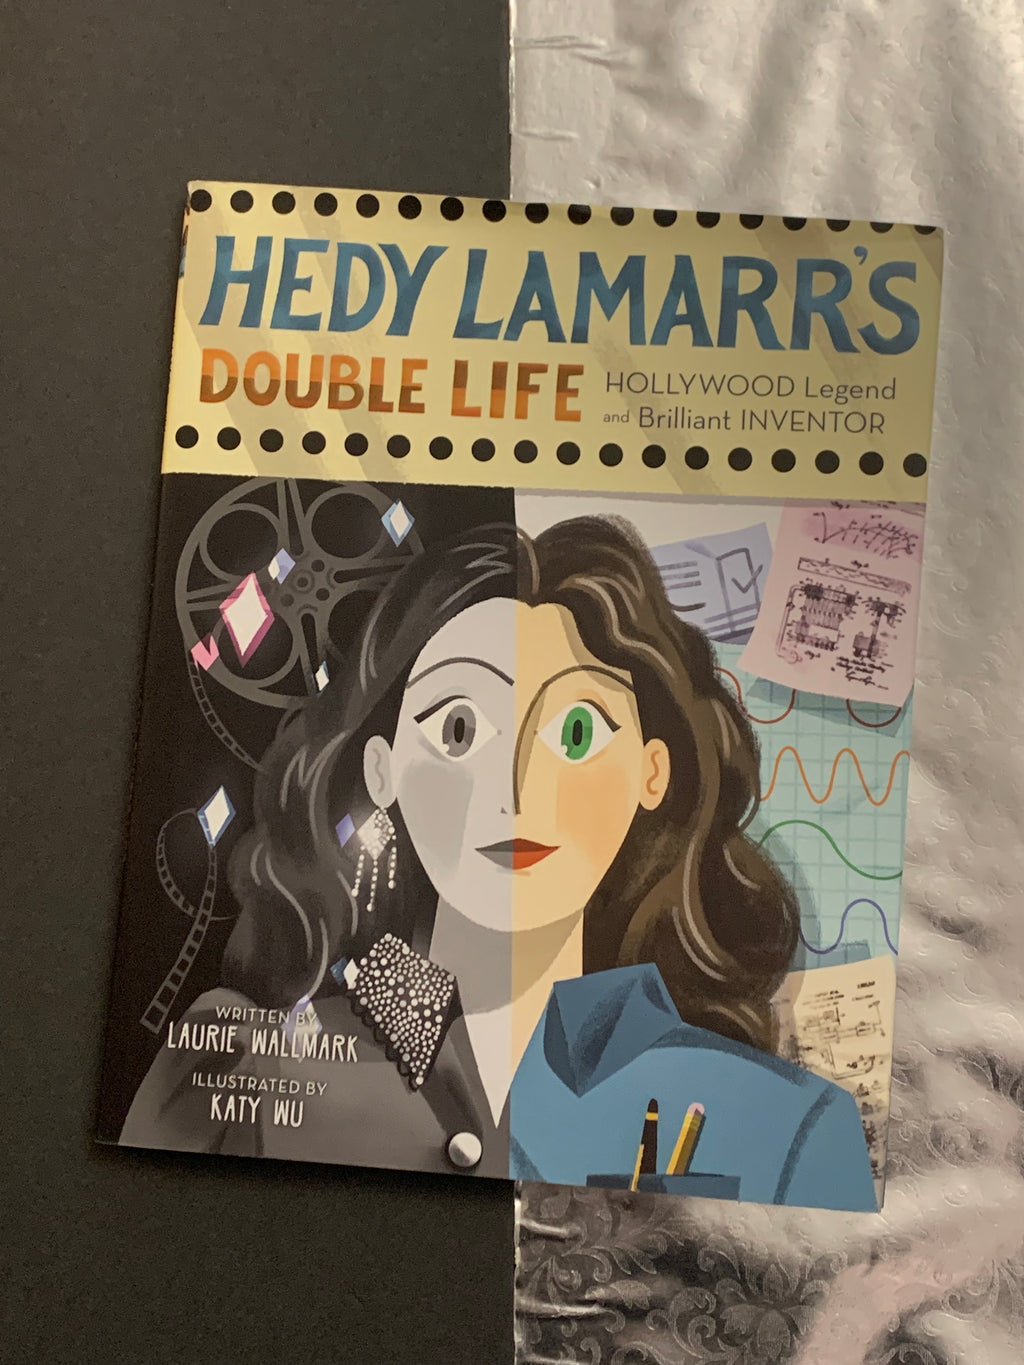 Hedy Lamarr's Double Life: Hollywood Legend and Brilliant Inventor- By Laurie Wallmark